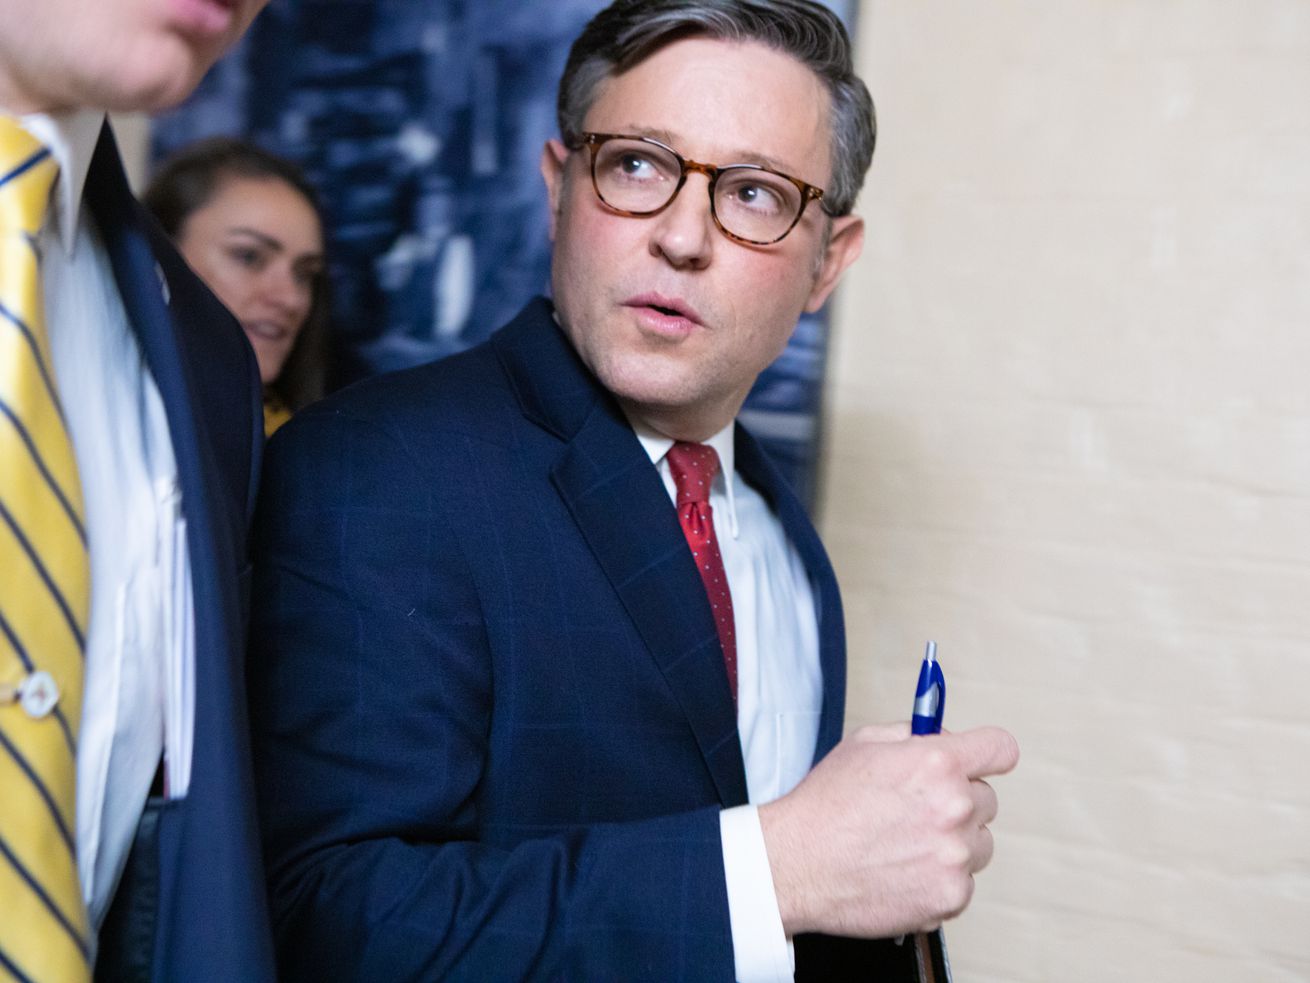 Mike Johnson pictured wearing a navy suit jacket, red tie, and glasses. He appears to be holding a blue pen in his hand.